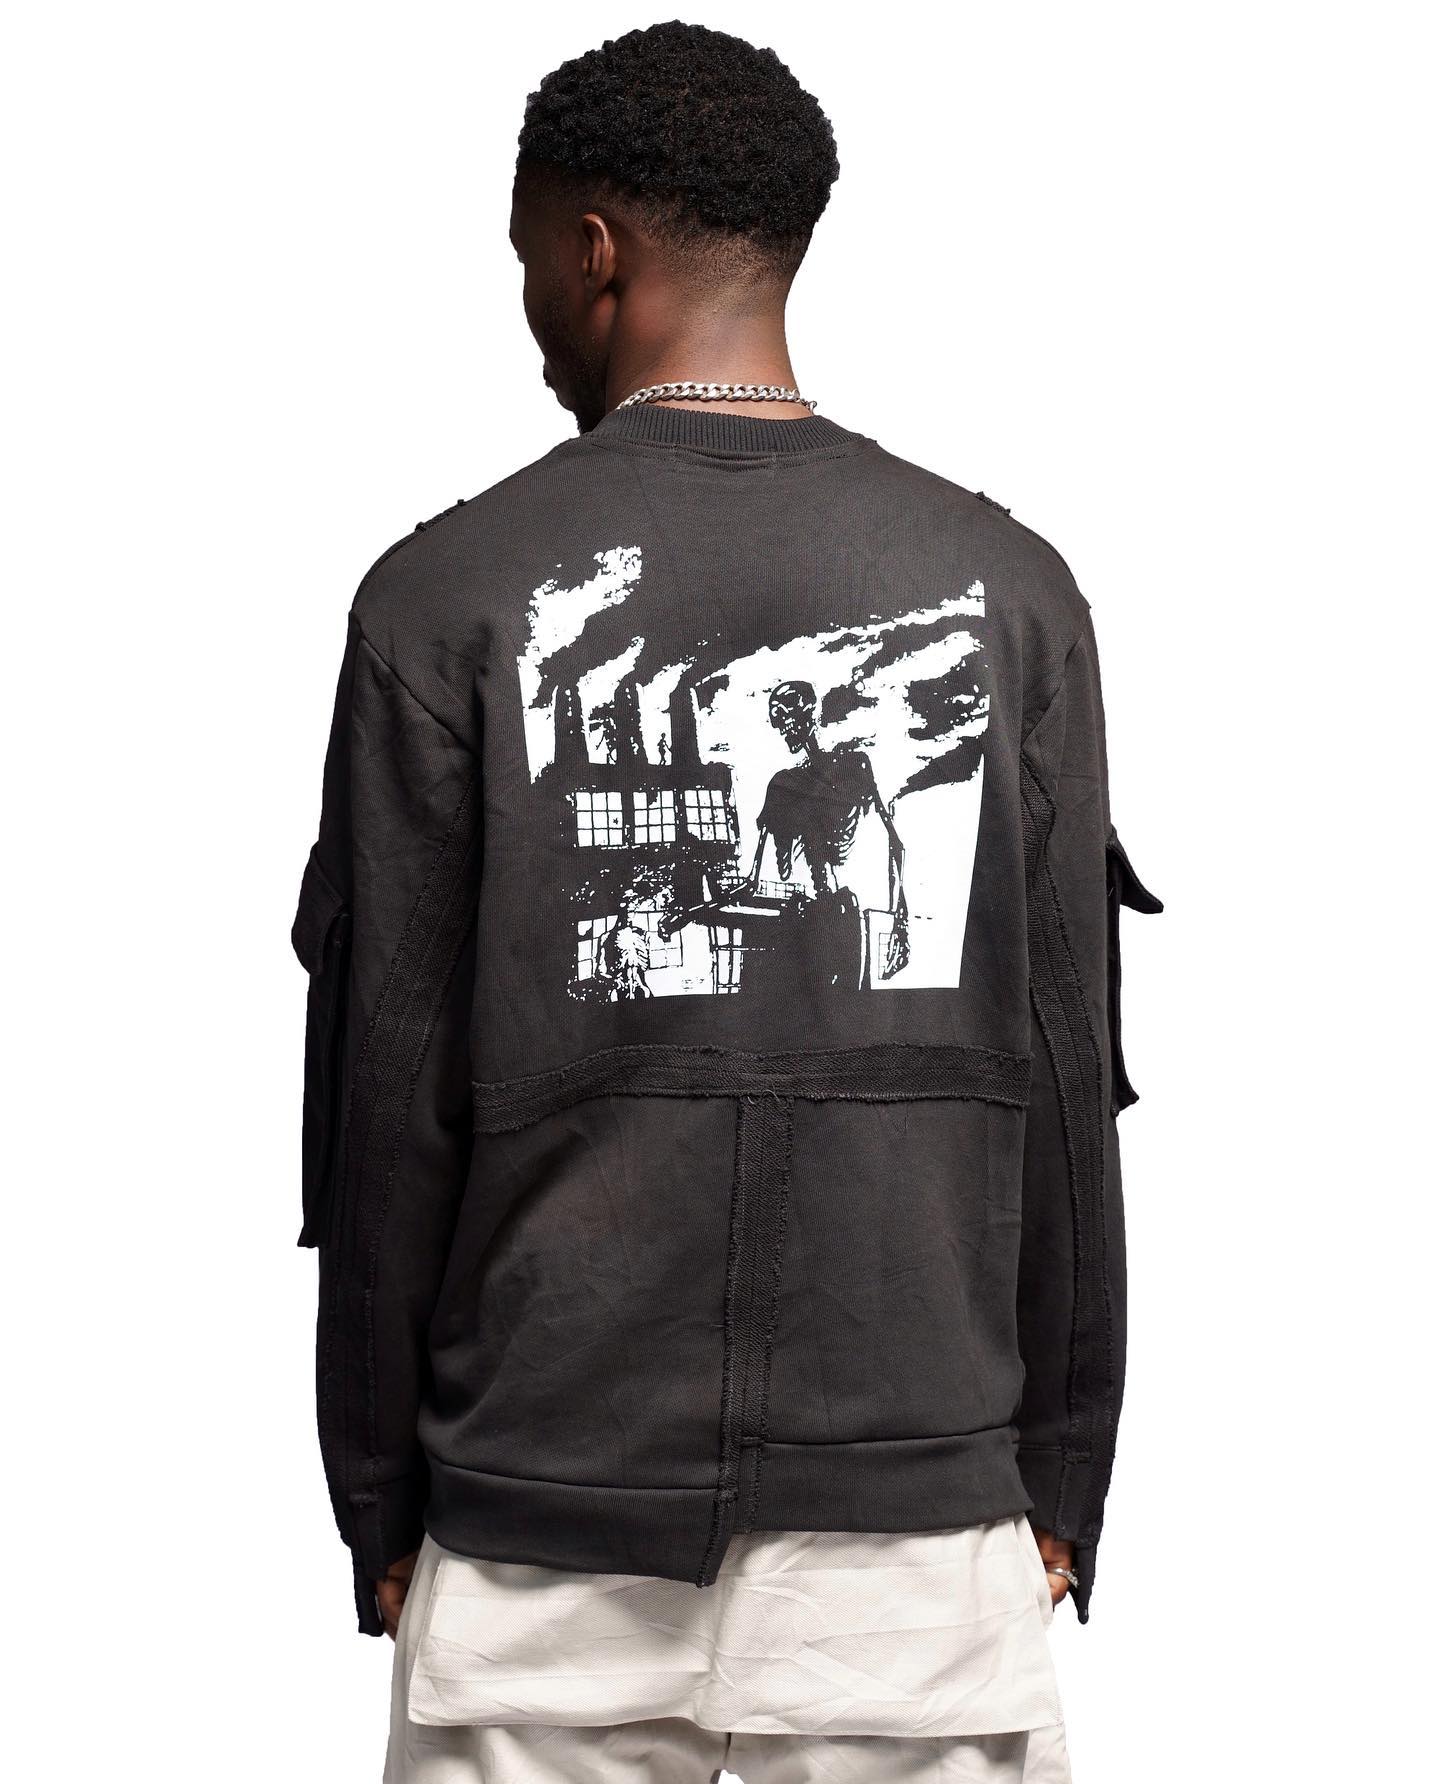 'Born from Pain' Sweater